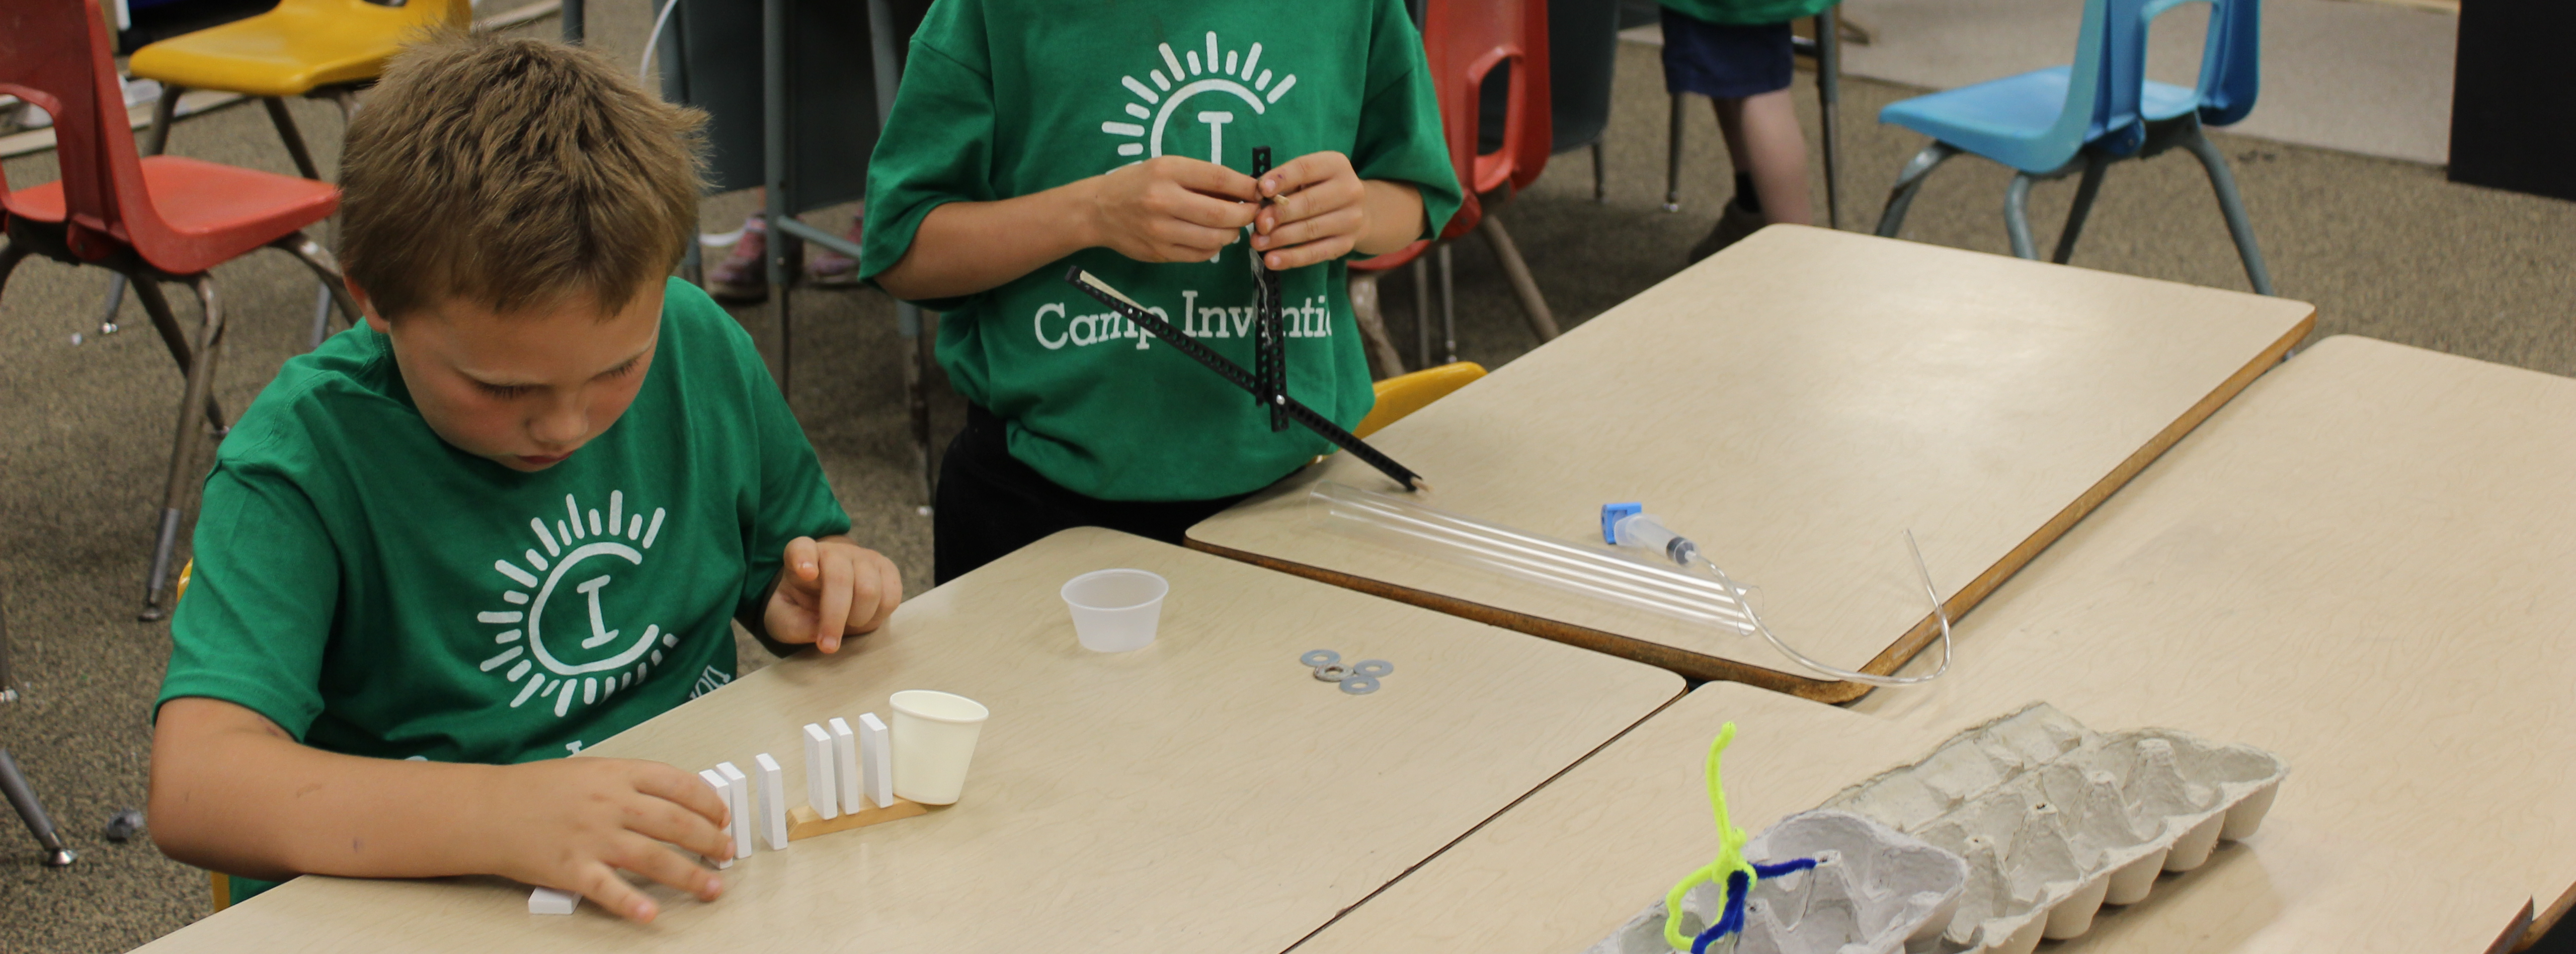 two boys participate in Camp Invention